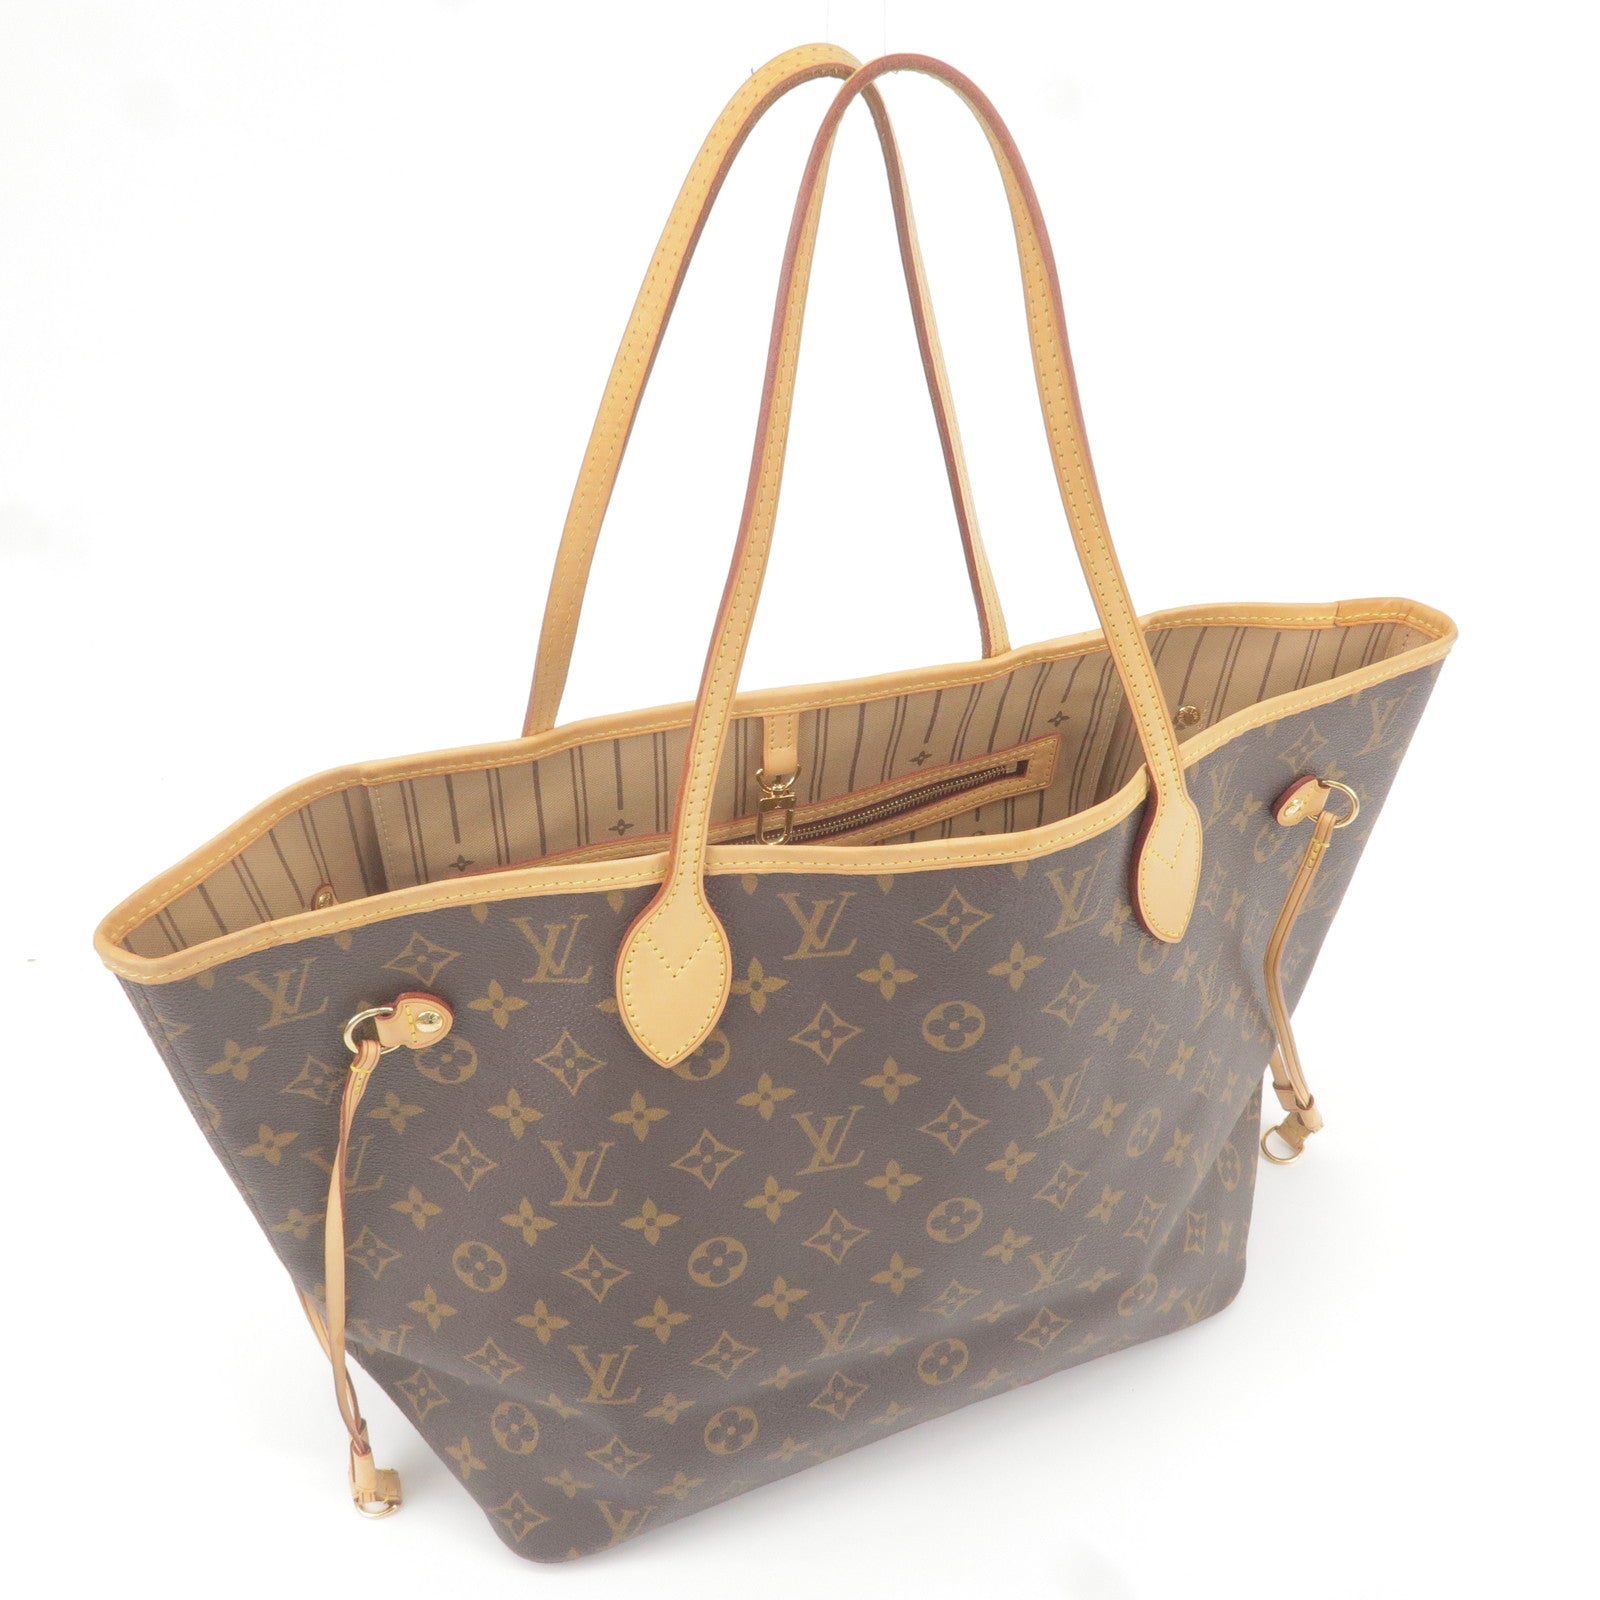 Vuitton - ep_vintage luxury Store - Over at Louis Vuitton - Monogram - Louis  - Neverfull - Bag - Brown - MM - M40156 – dct - Tote